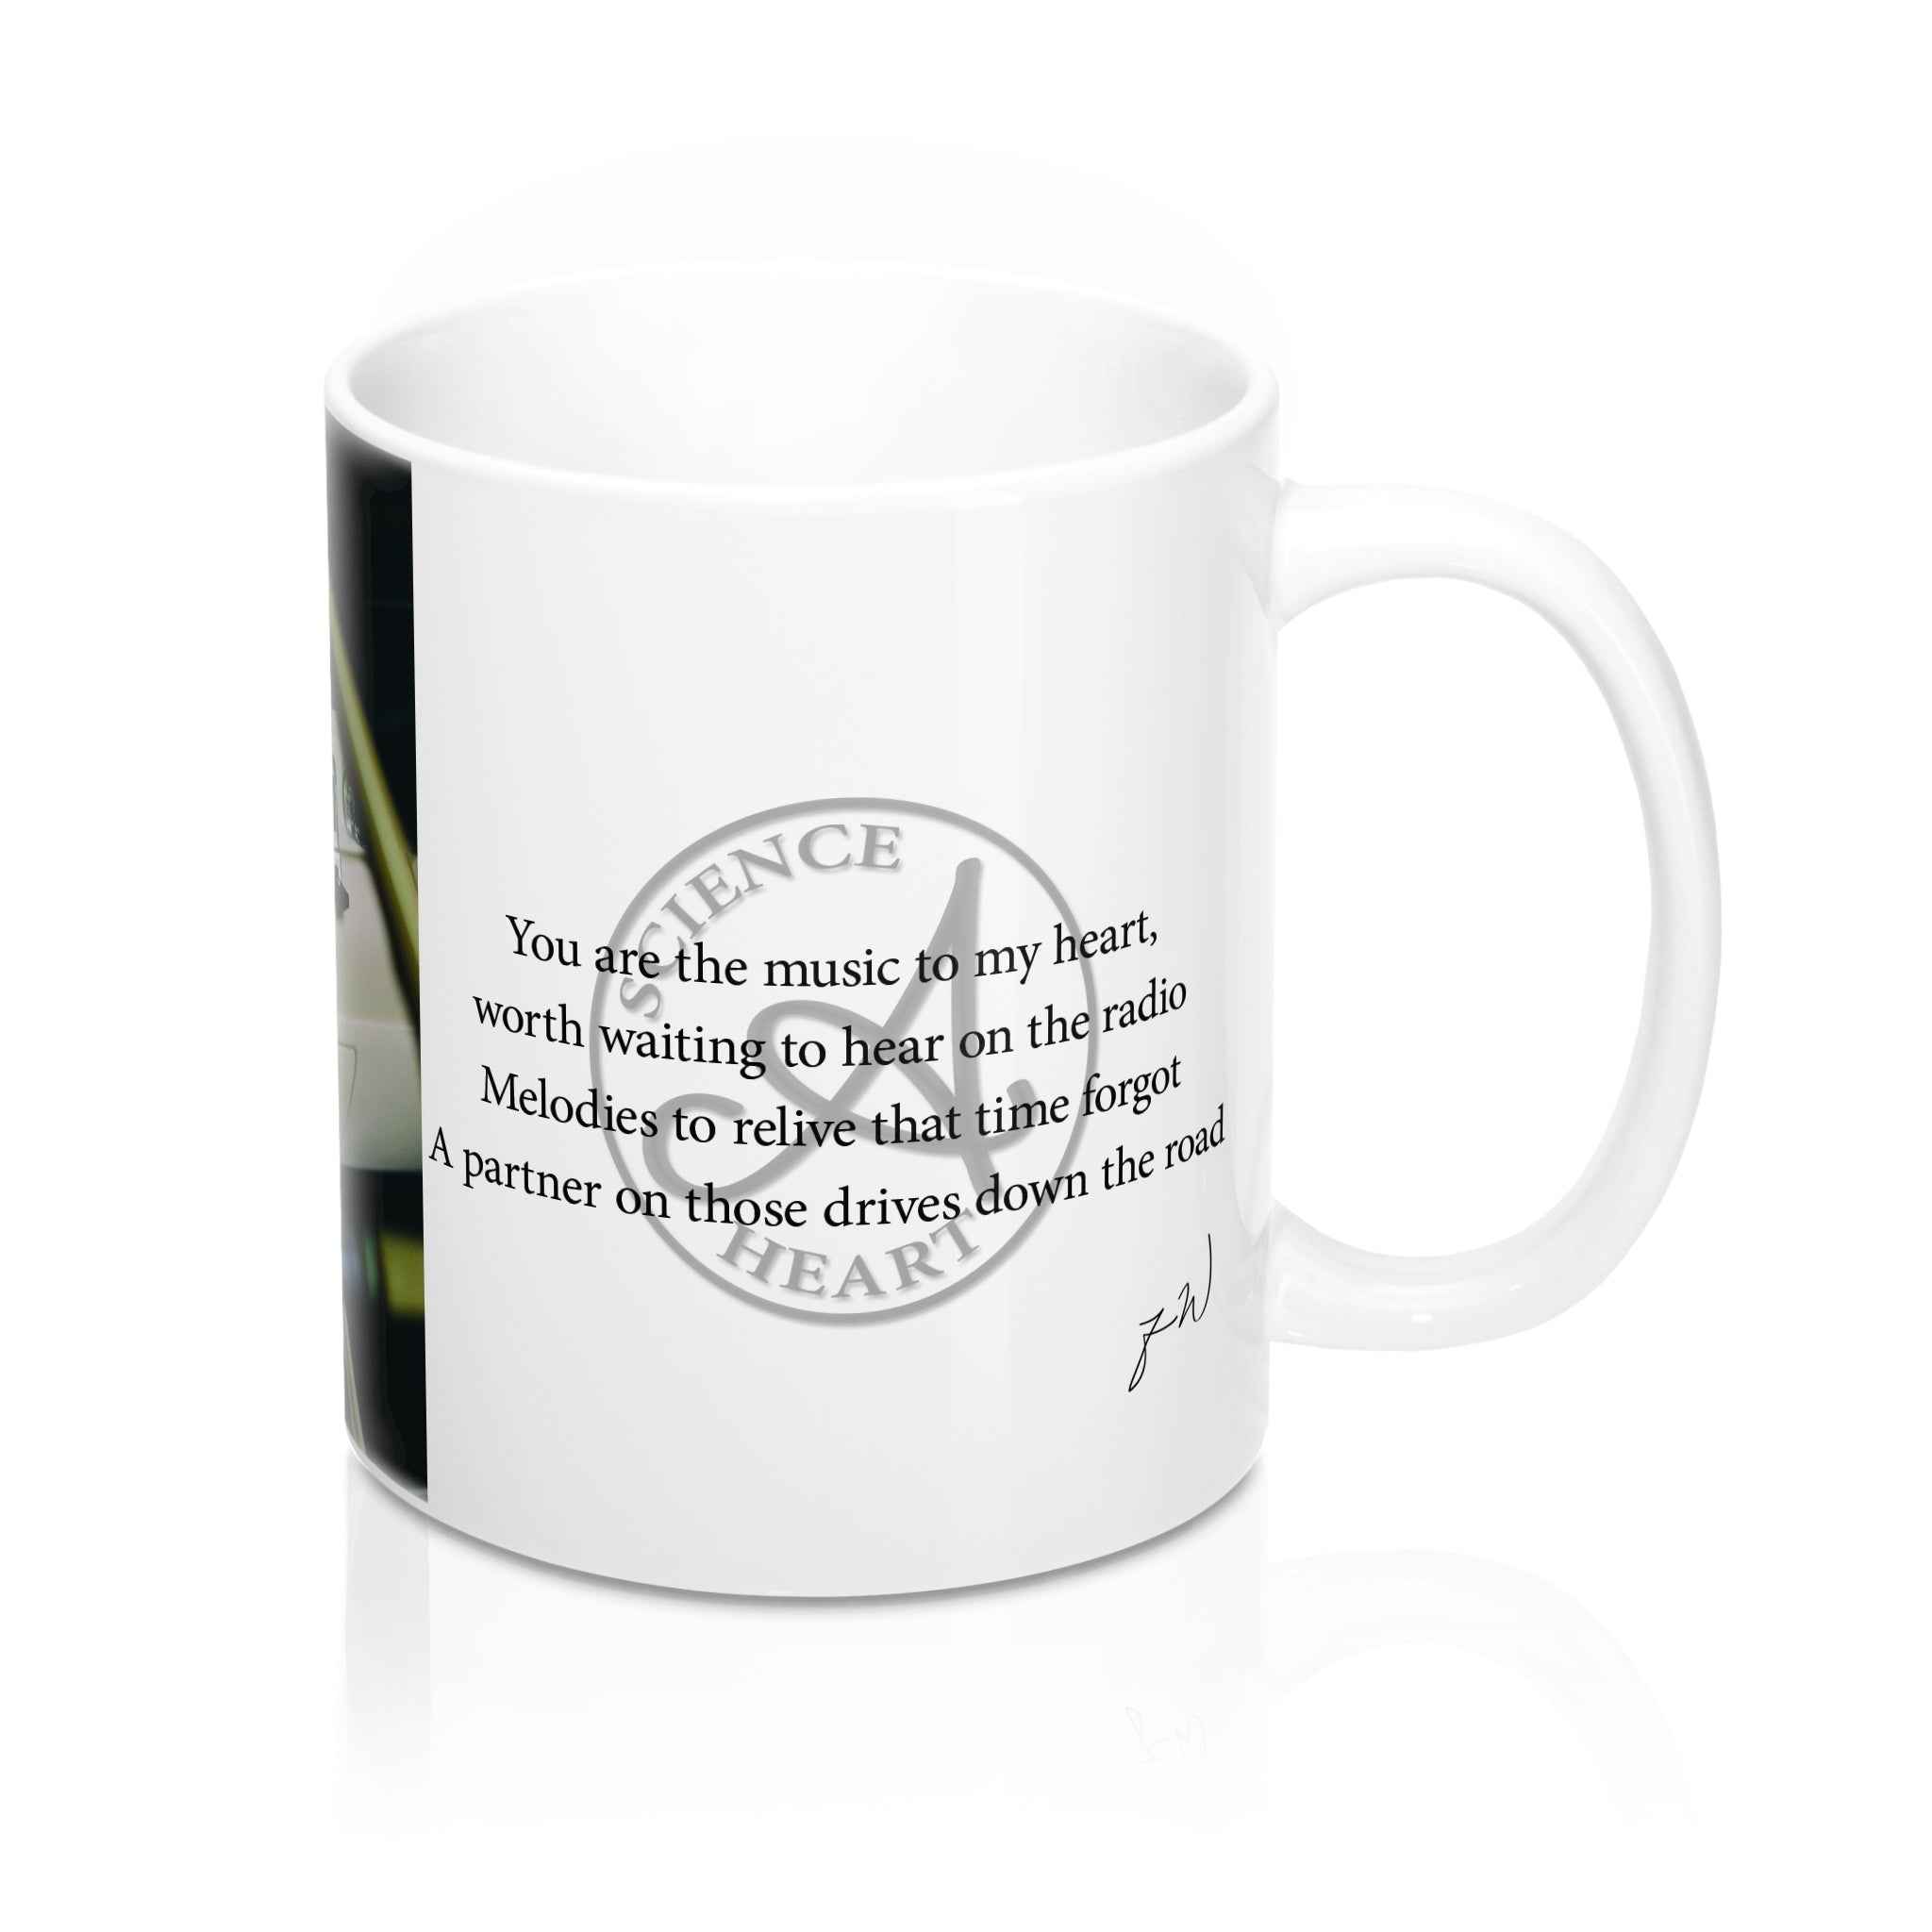 "You are the music to my heart" Mug